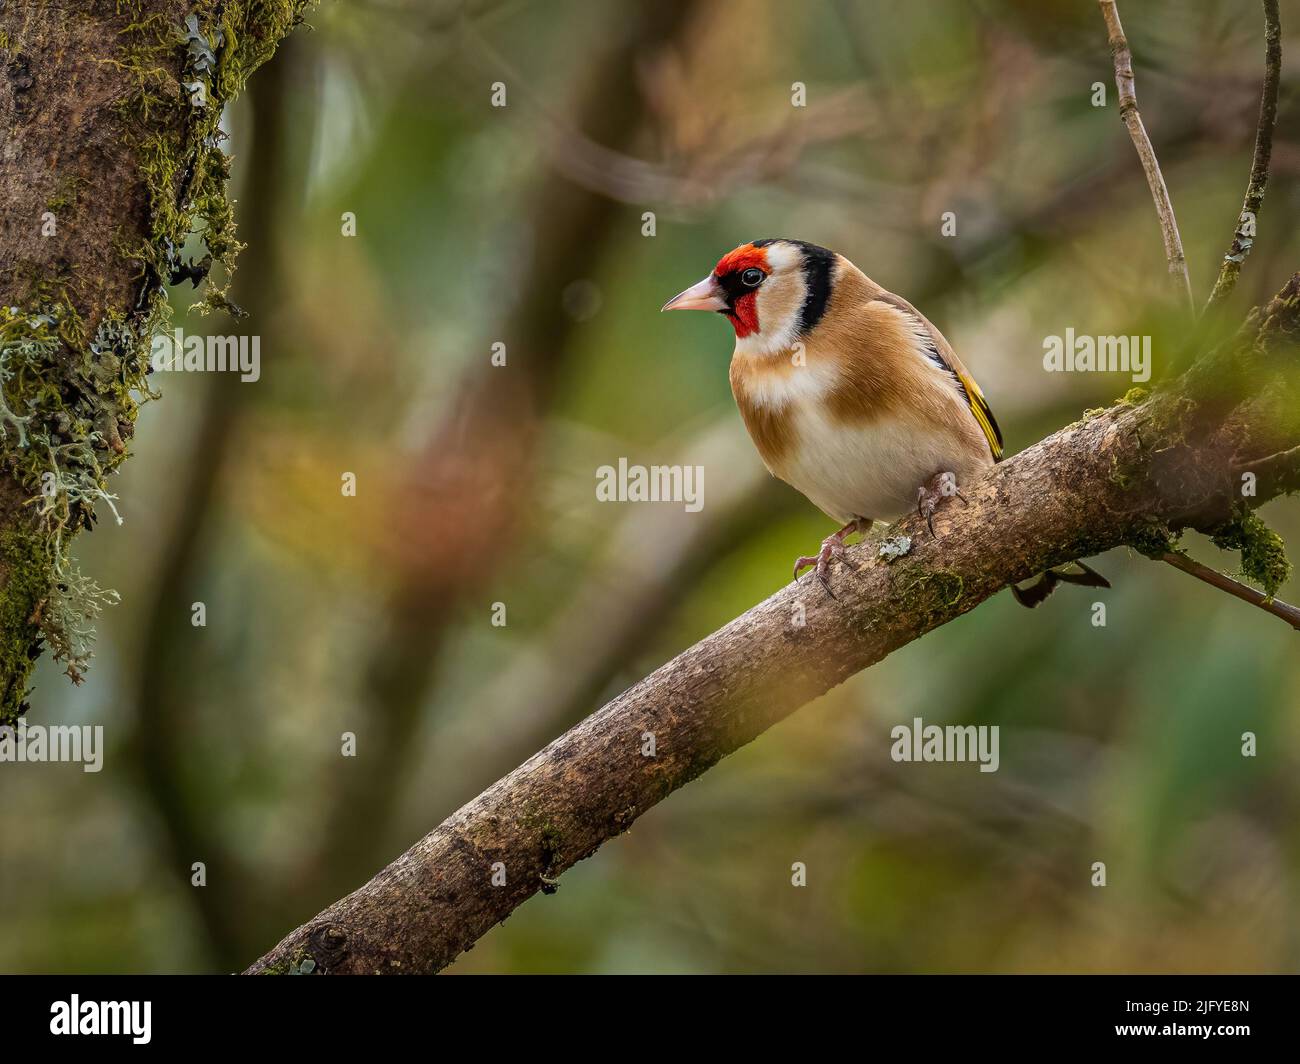 European goldfinch bird, (Carduelis carduelis), perched on a branch during Springtime Stock Photo